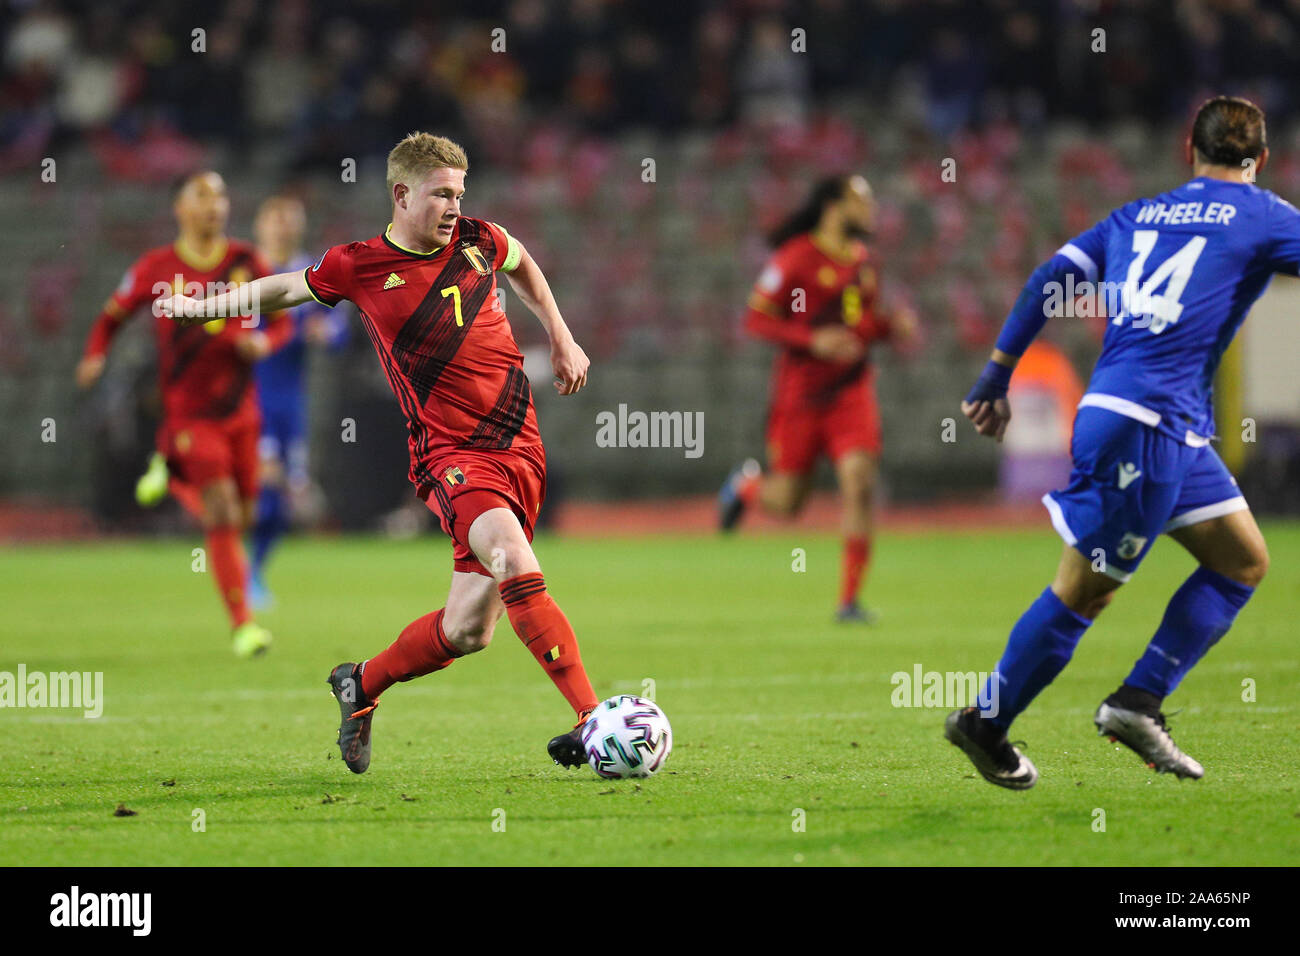 Brussels, Belgium. 19th Nov, 2019. Kevin De Bruyne of Belgium passes the ball during a UEFA Euro 2020 group I qualifying match between Belgium and Cyprus in Brussels, Belgium, Nov. 19, 2019. Credit: Zheng Huansong/Xinhua/Alamy Live News Stock Photo